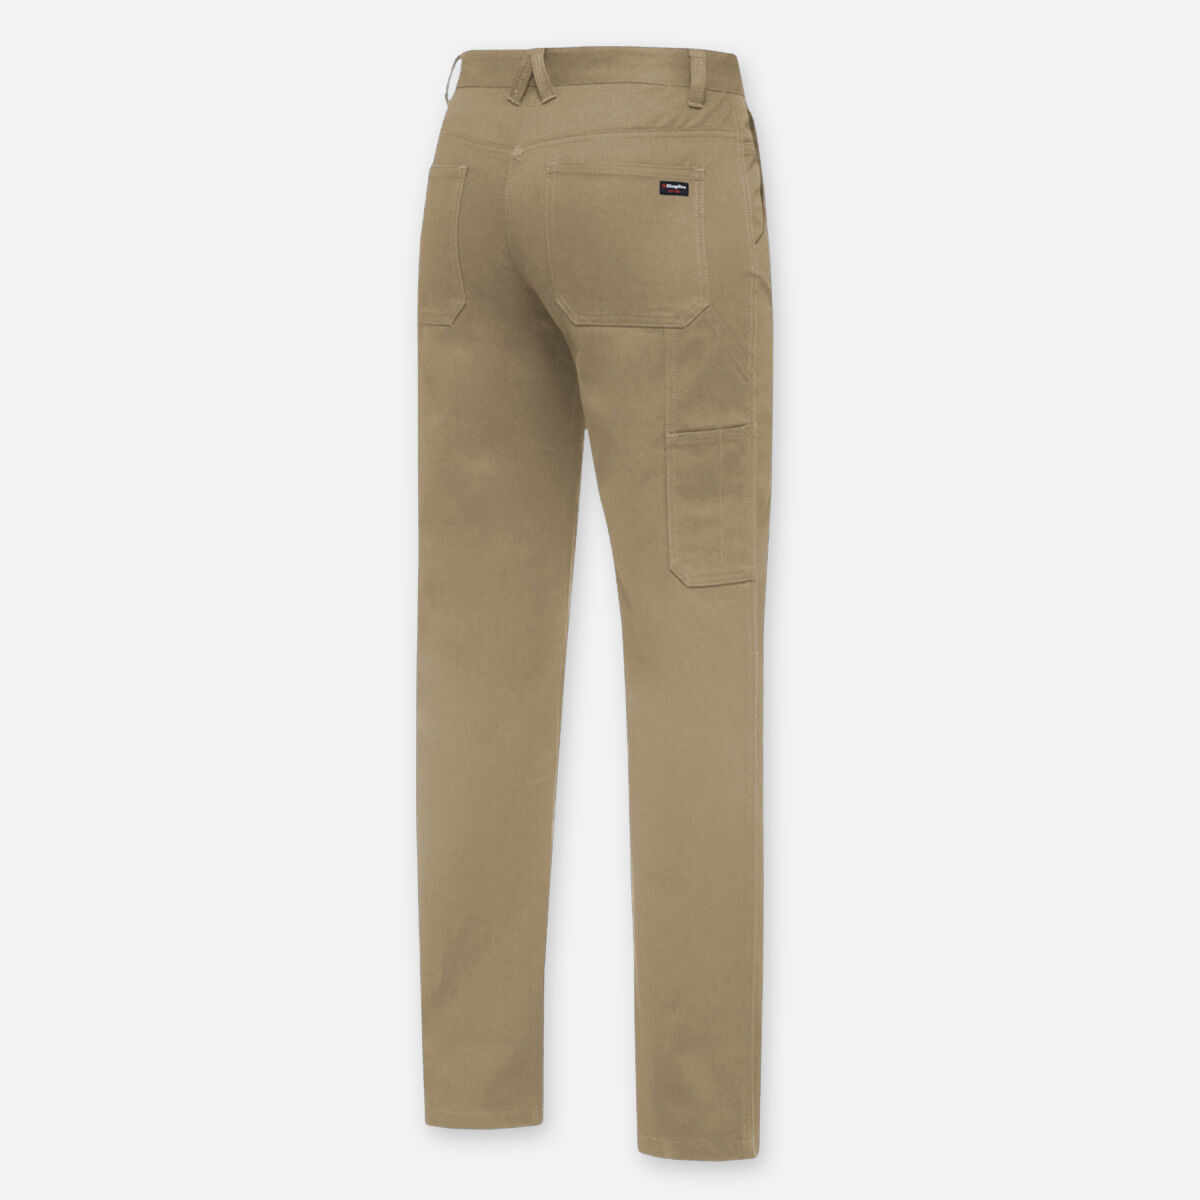 DNC Taped Workpants - Navy | Hip Pocket Workwear & Safety